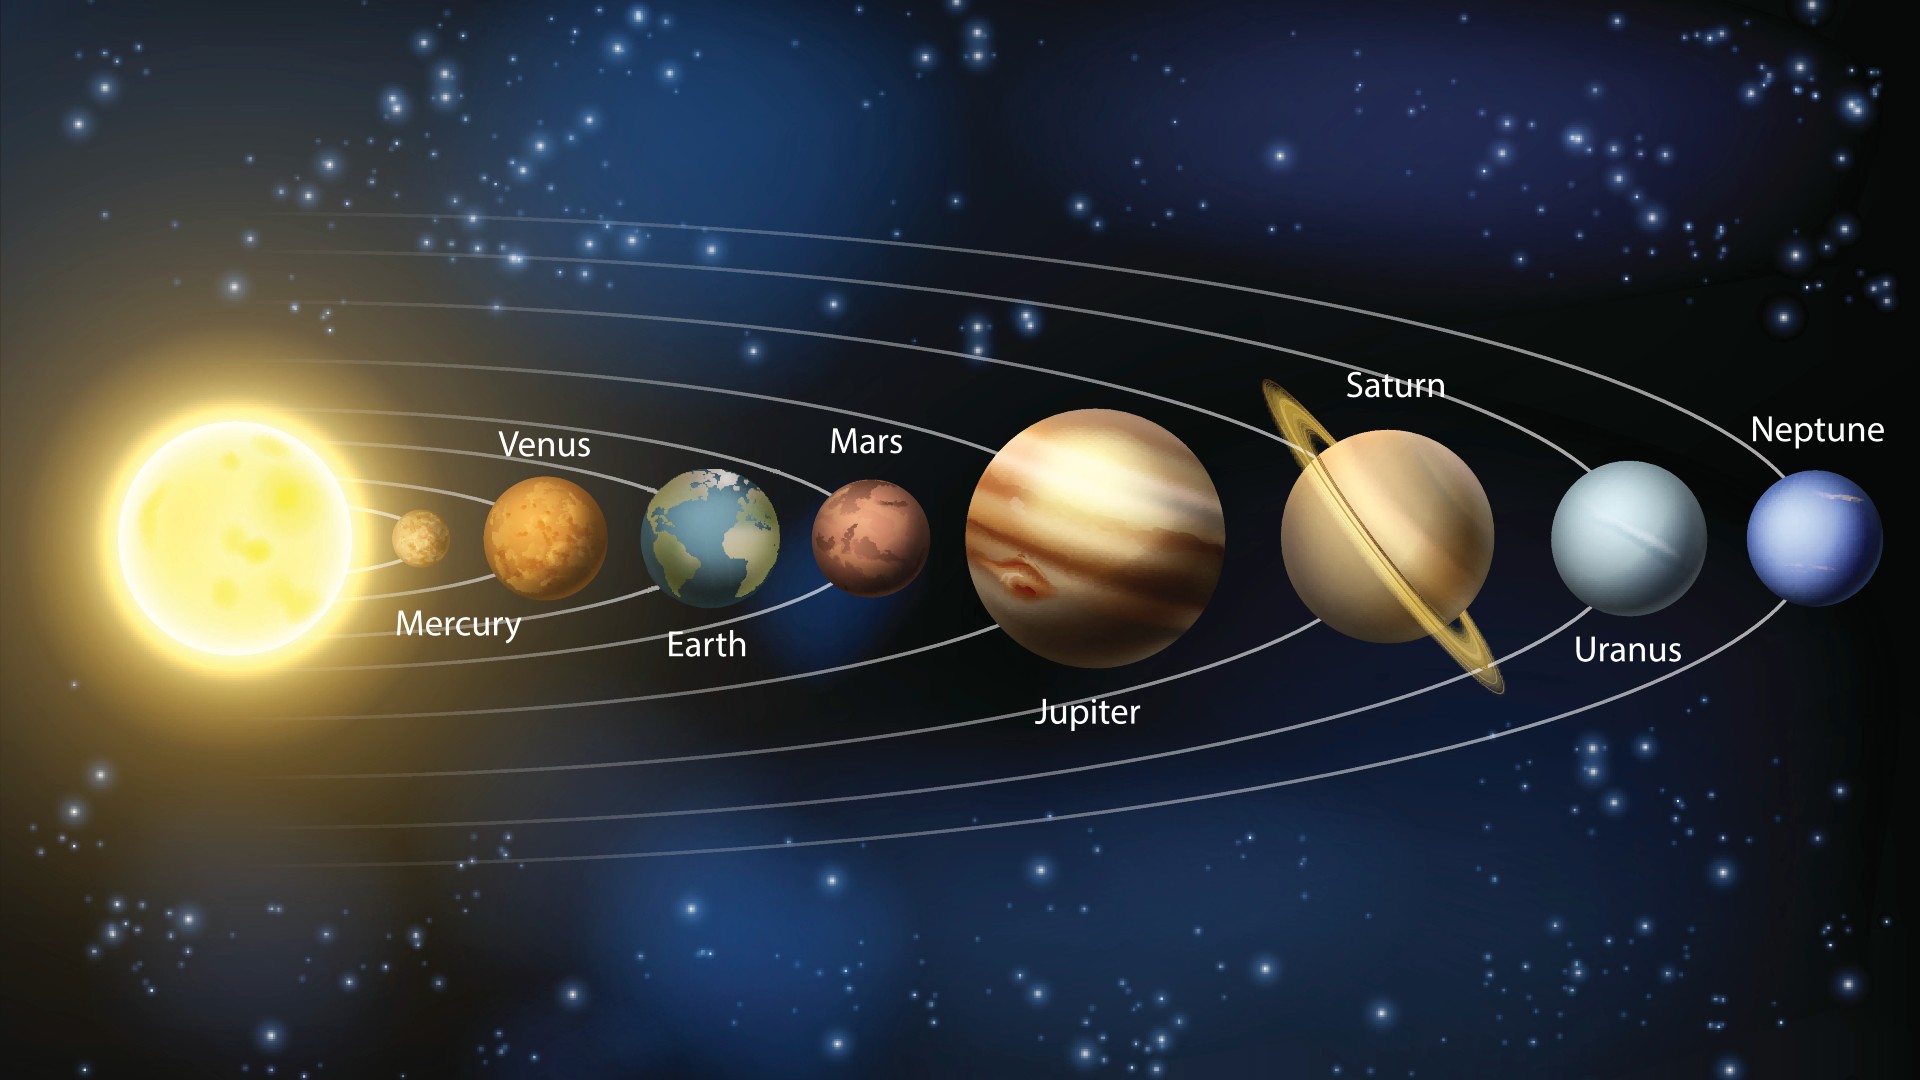 A diagram of the planets of our solar system with the names of the planets.  Left to right: Sun (bright yellow), Mercury (smaller, brown), Venus (slightly larger, reddish brown), Earth (slightly larger, blue and green), Mars (slightly smaller, red ), Jupiter (largest, brown and tan), Saturn (slightly smaller, tan with a yellow ring around it), Uranus (smaller, but larger than Earth gray), and Neptune (slightly smaller, blue).  There are also white rings to show the orbit of each planet.